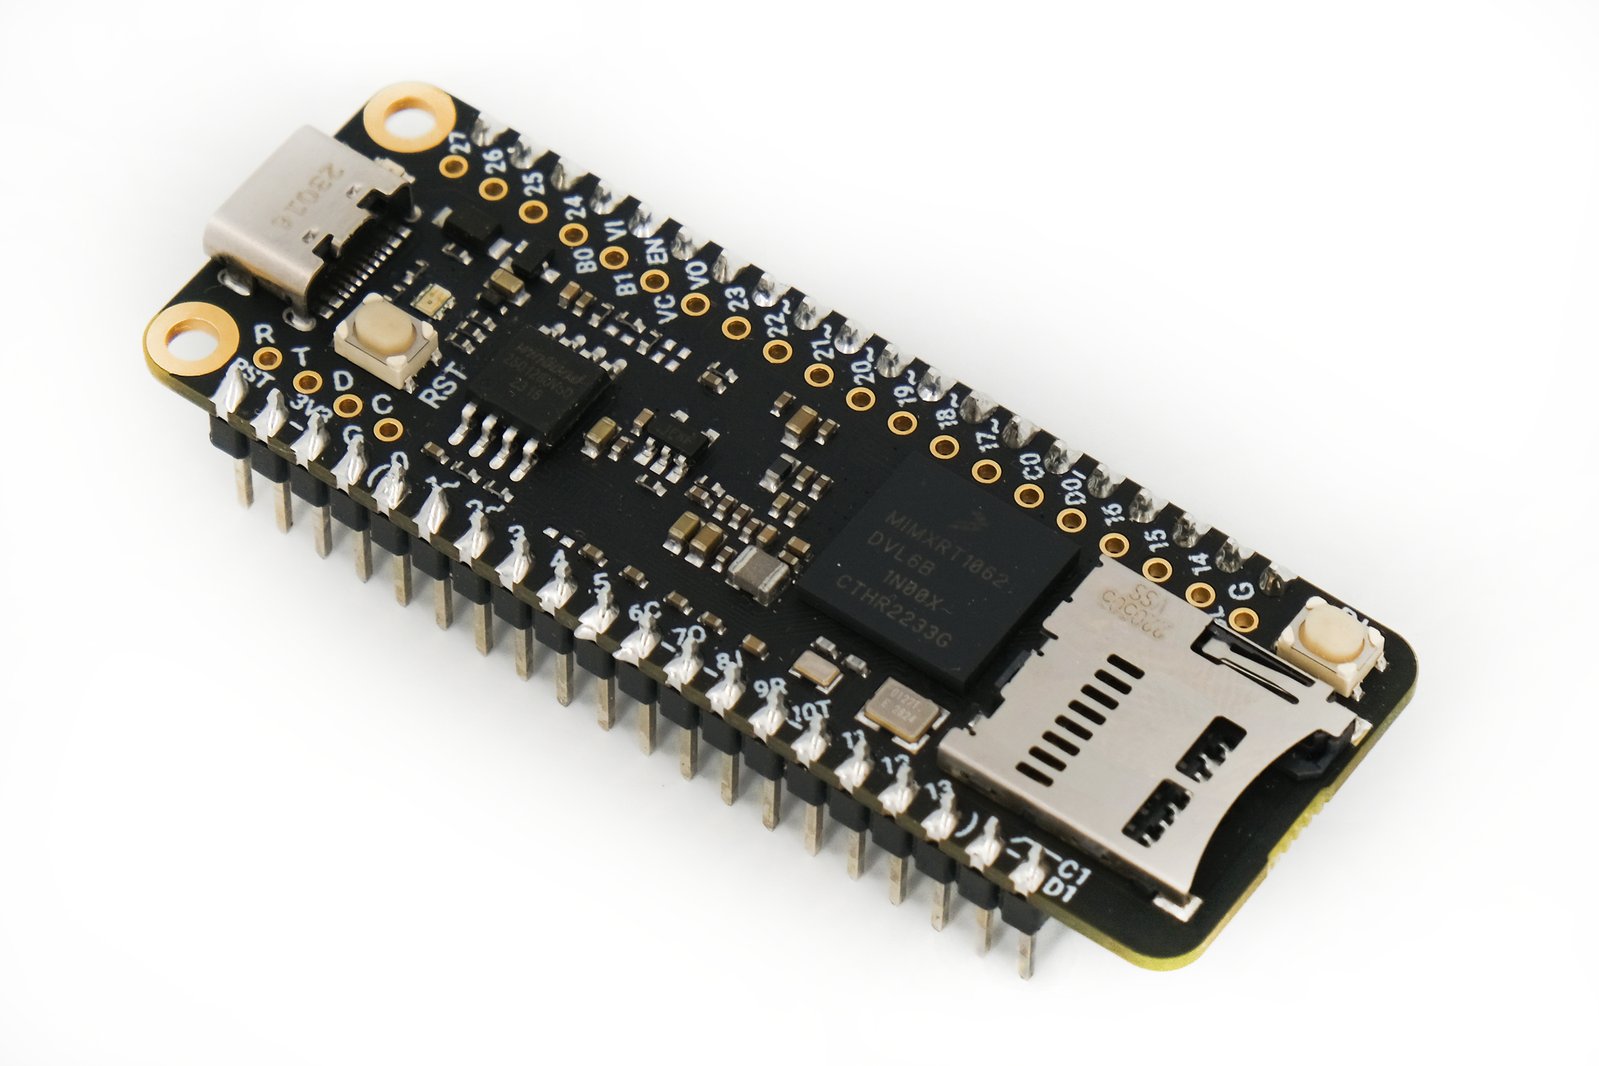 SwiftIO Playground Kit is an entry-level board to learn Swift programming